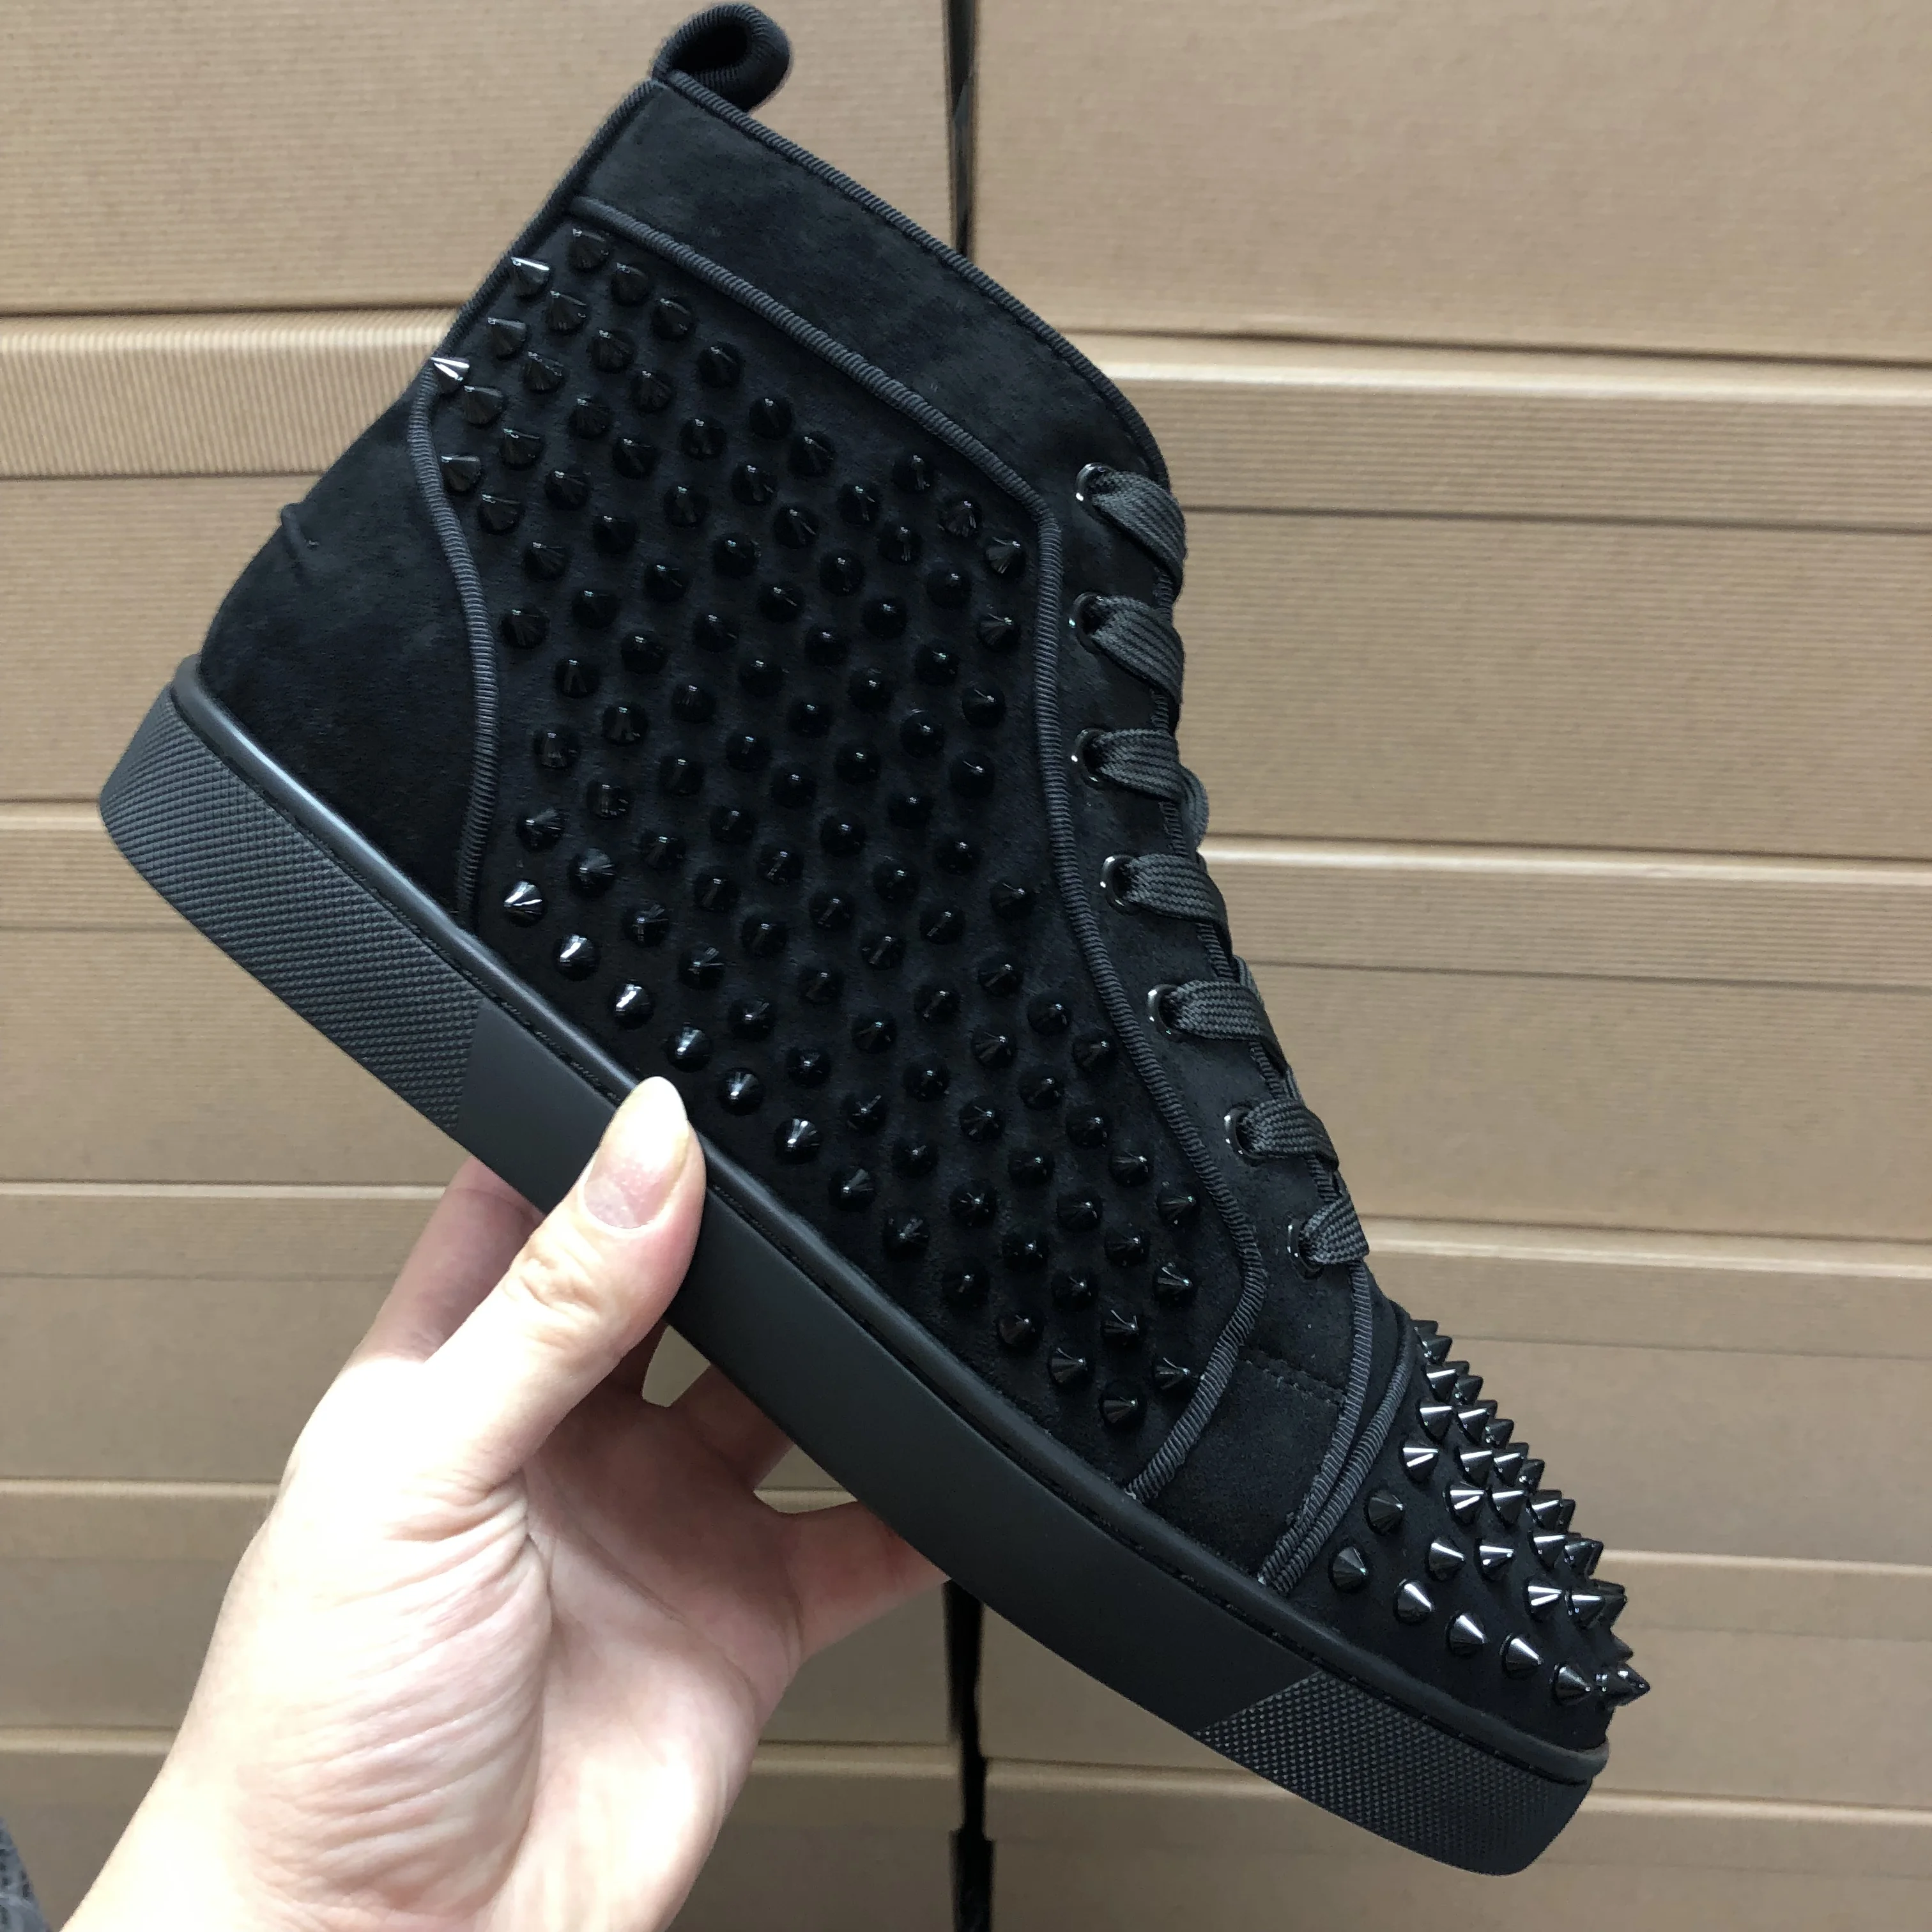 Wholesale Hightop Famous Brand Black Red Bottoms Mens Unisex Designer Red  Bottom Sneakers Shoes Women with Spikes From m.